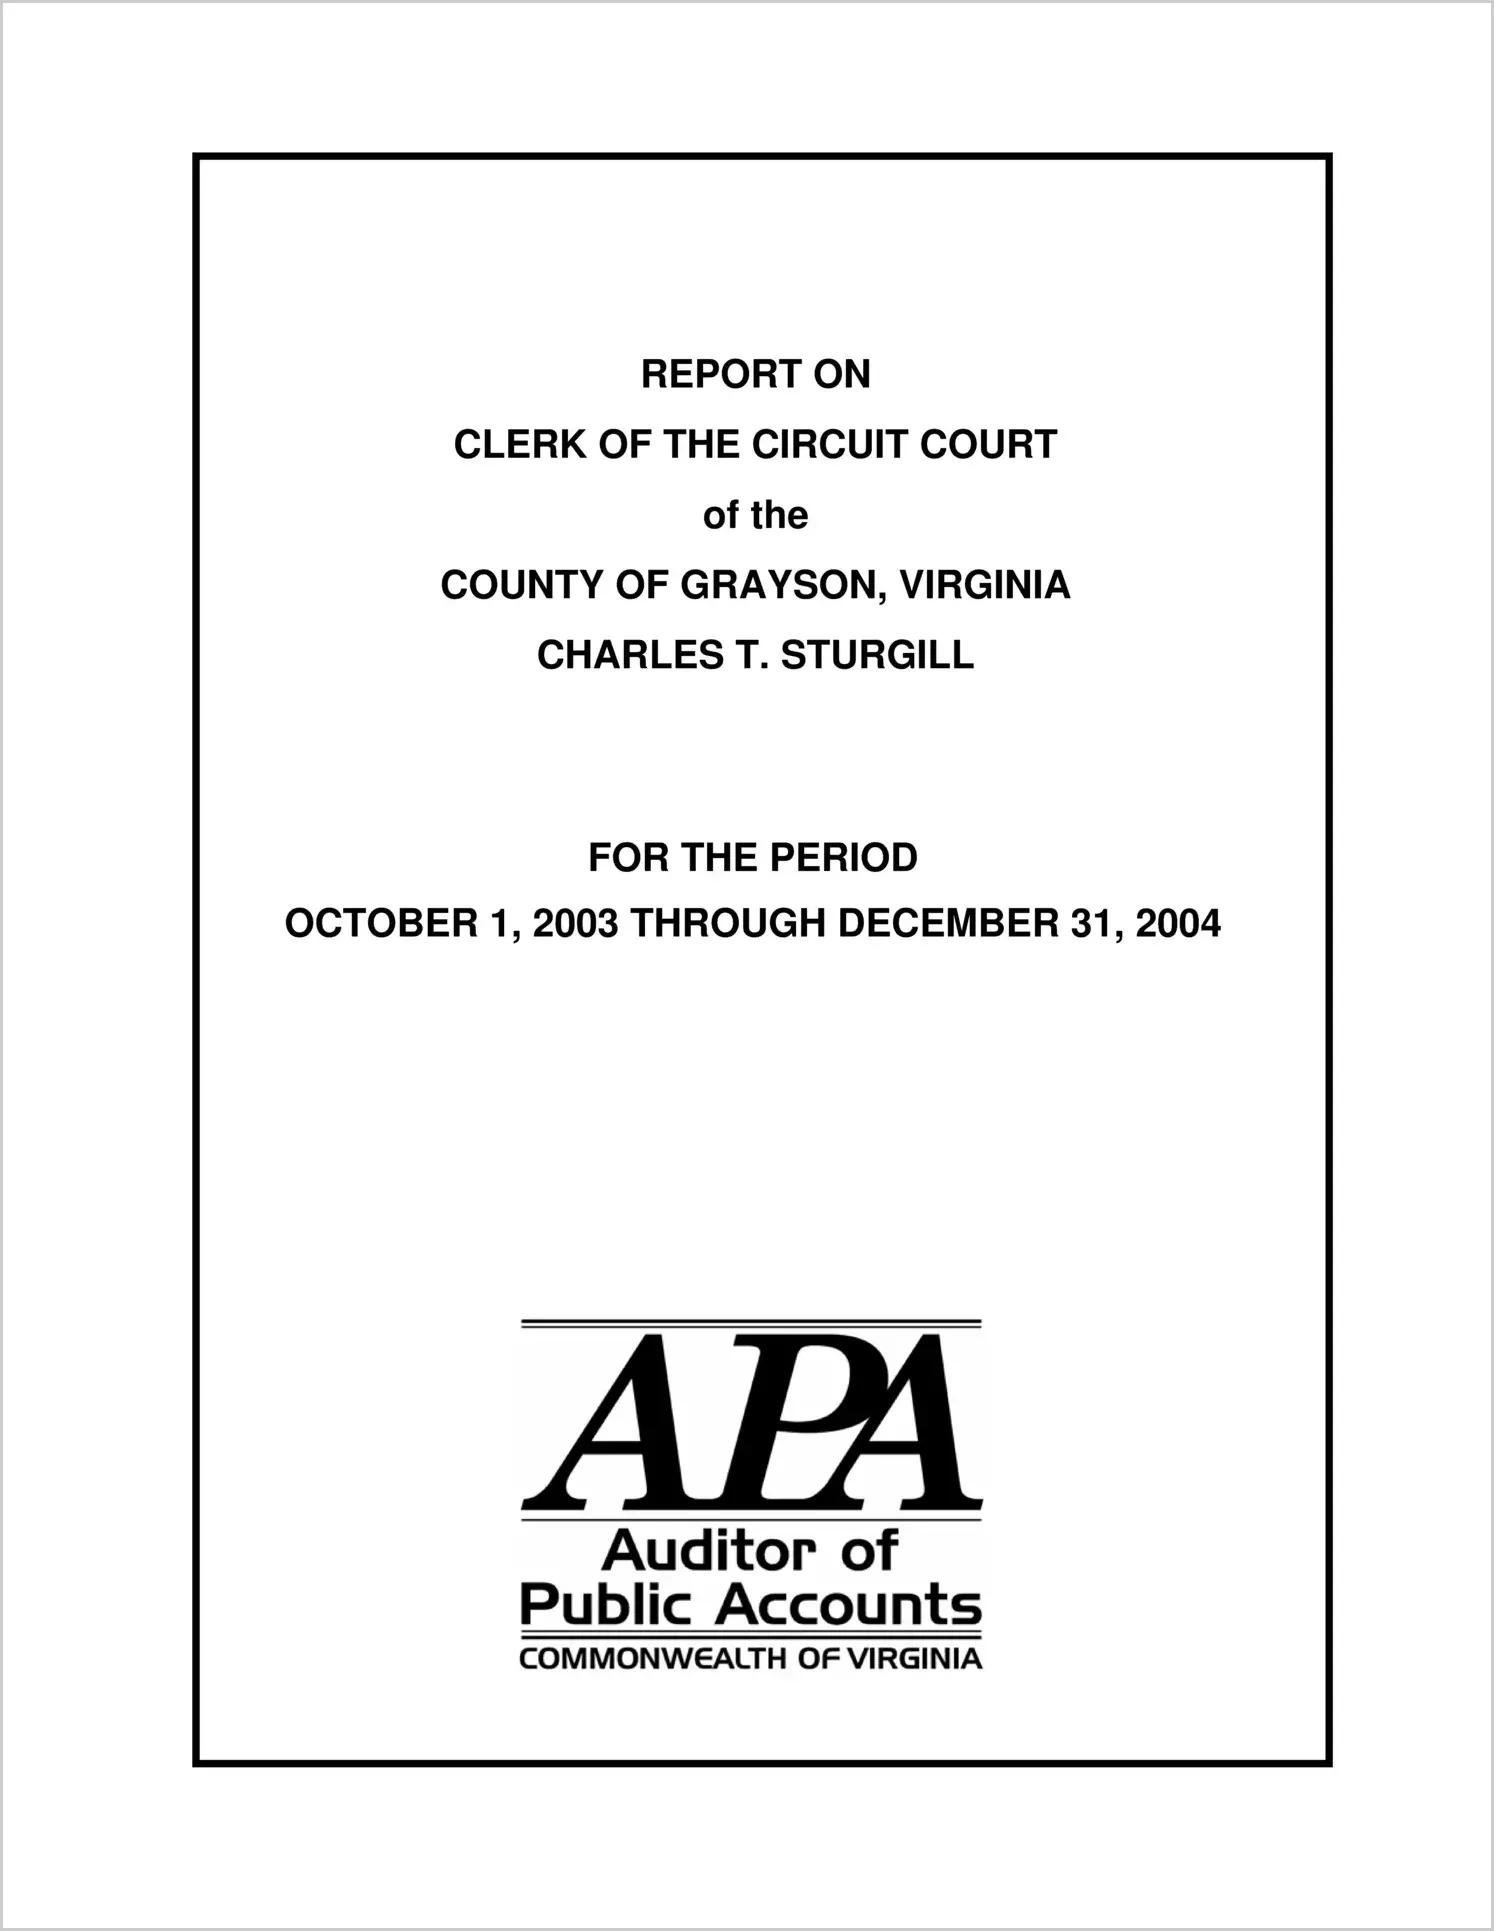 Clerk of the Circuit Court of the County of Grayson for the period October 1, 2003 through December 31, 2004